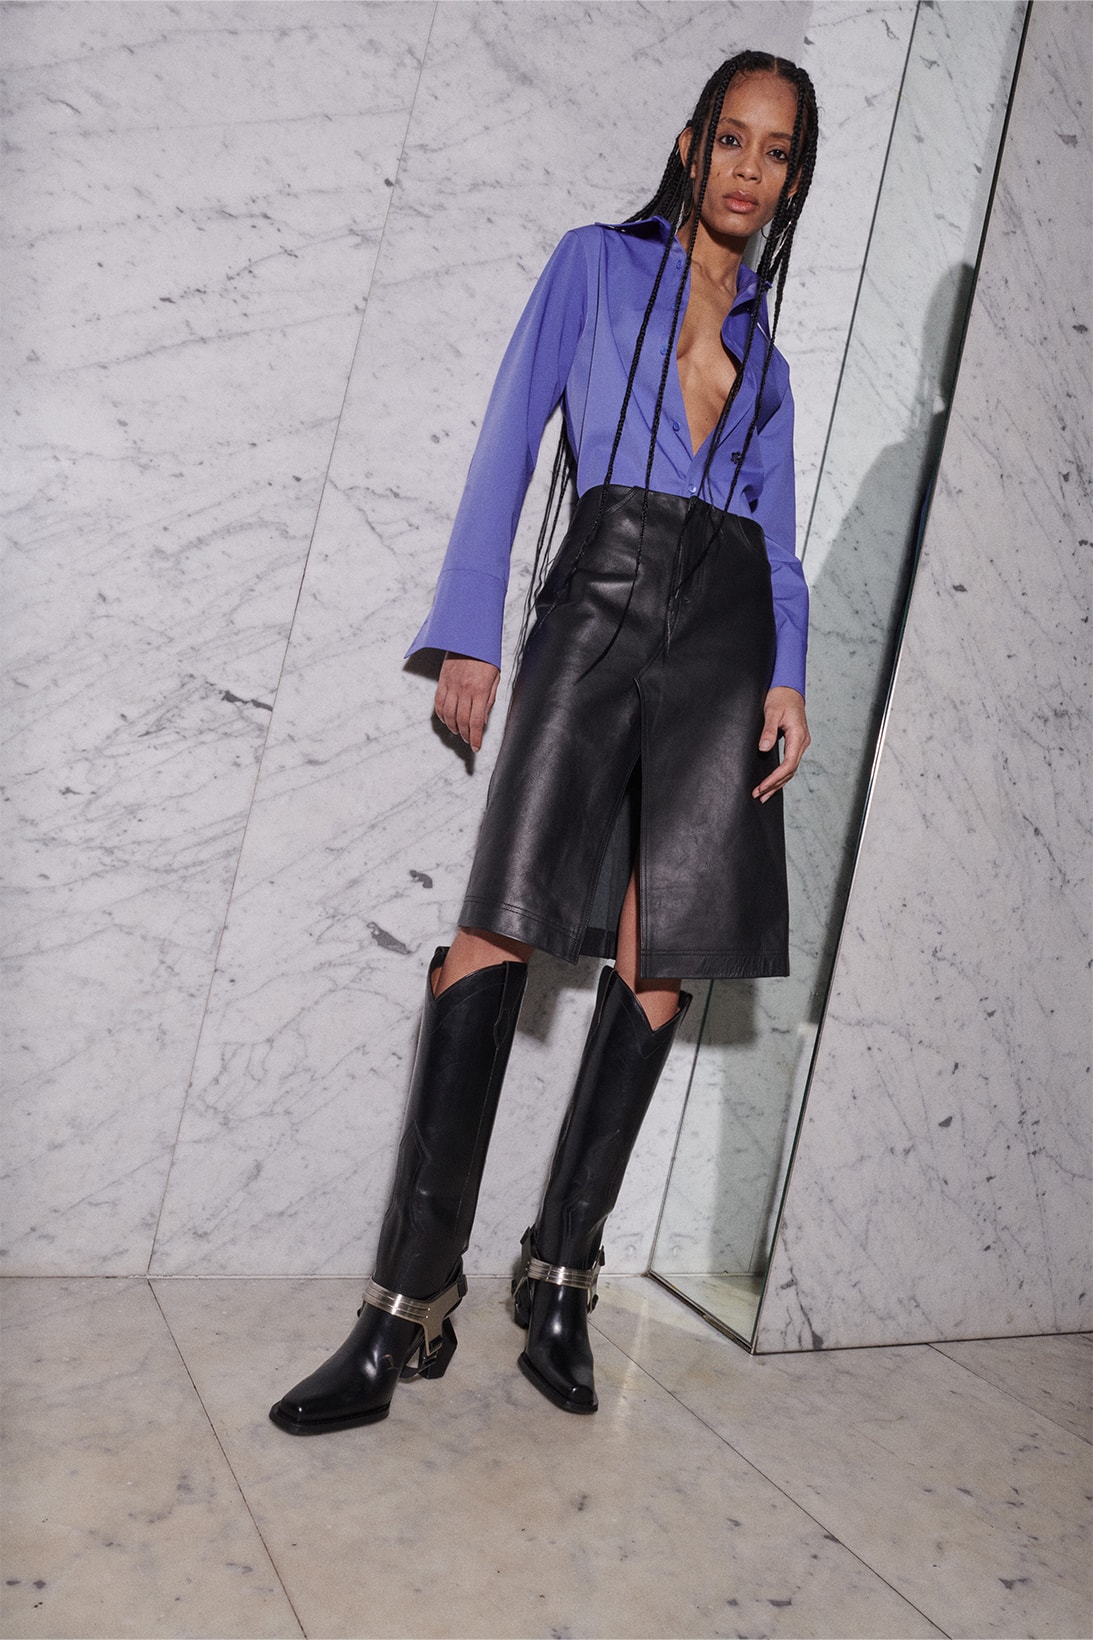 eytys fall collection blu rider jeans boots lookbook images shirt leather dress purple black